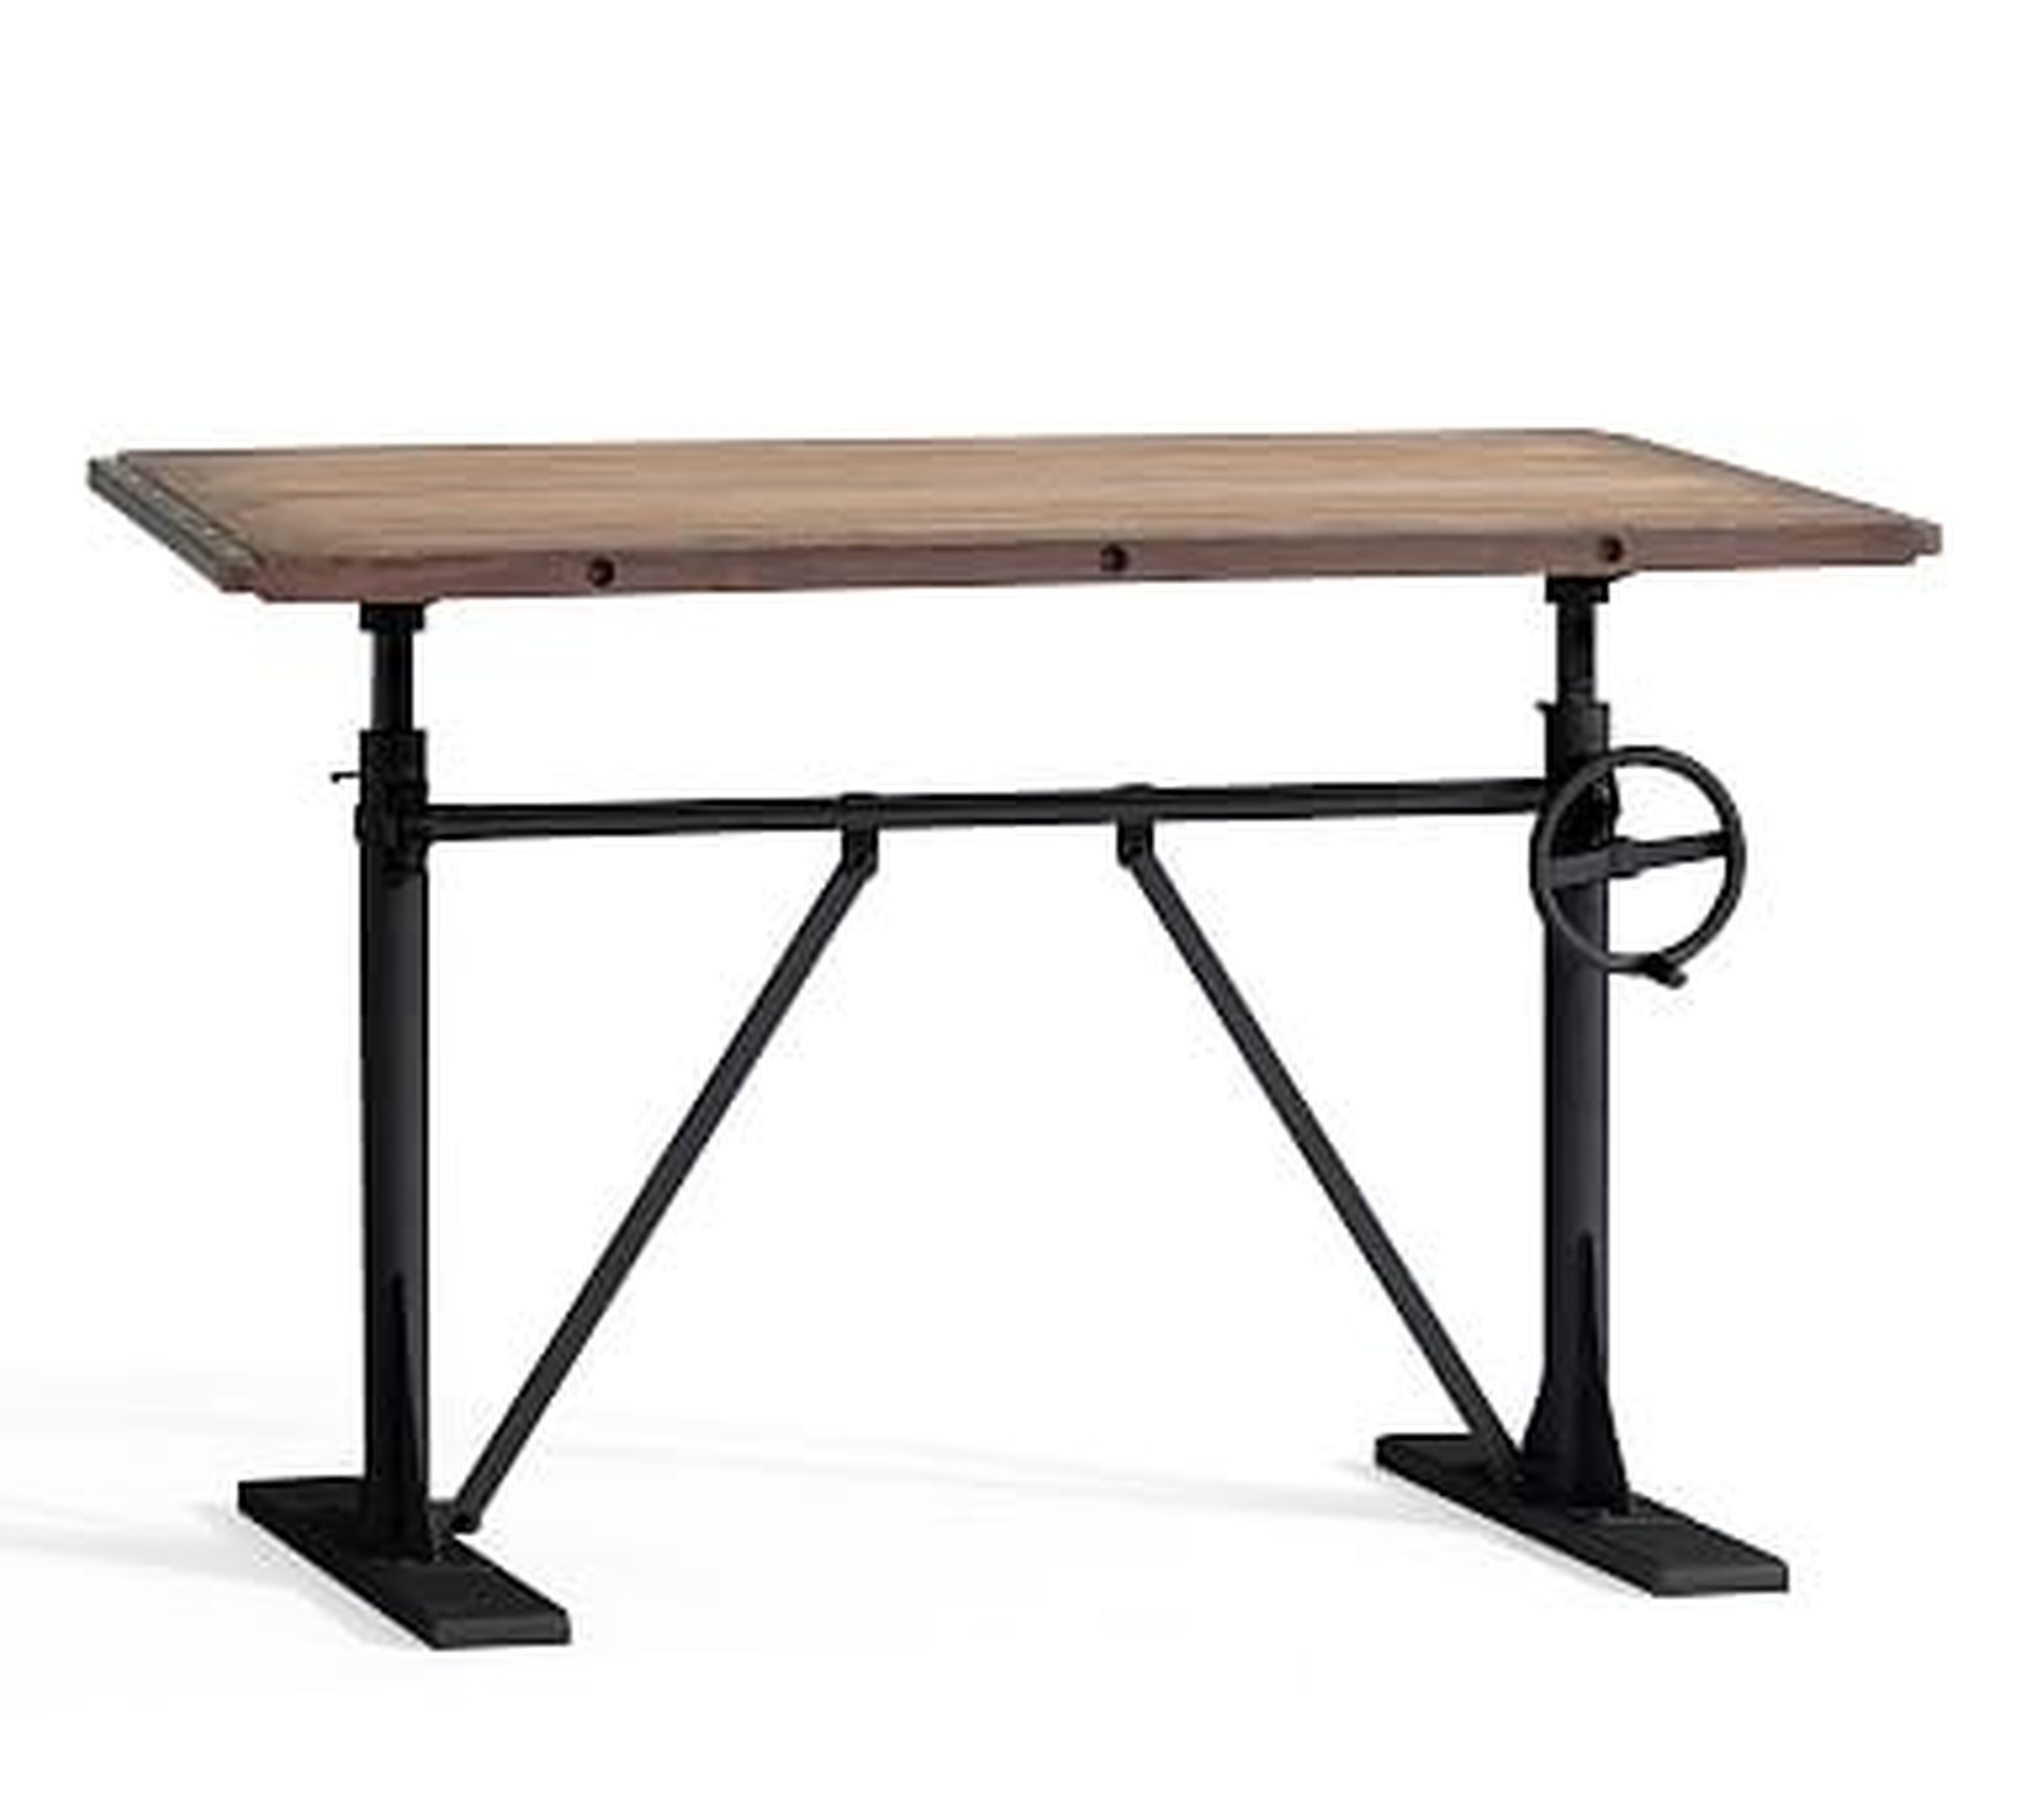 Pittsburgh Crank Standing Desk, Washed Pine - Pottery Barn